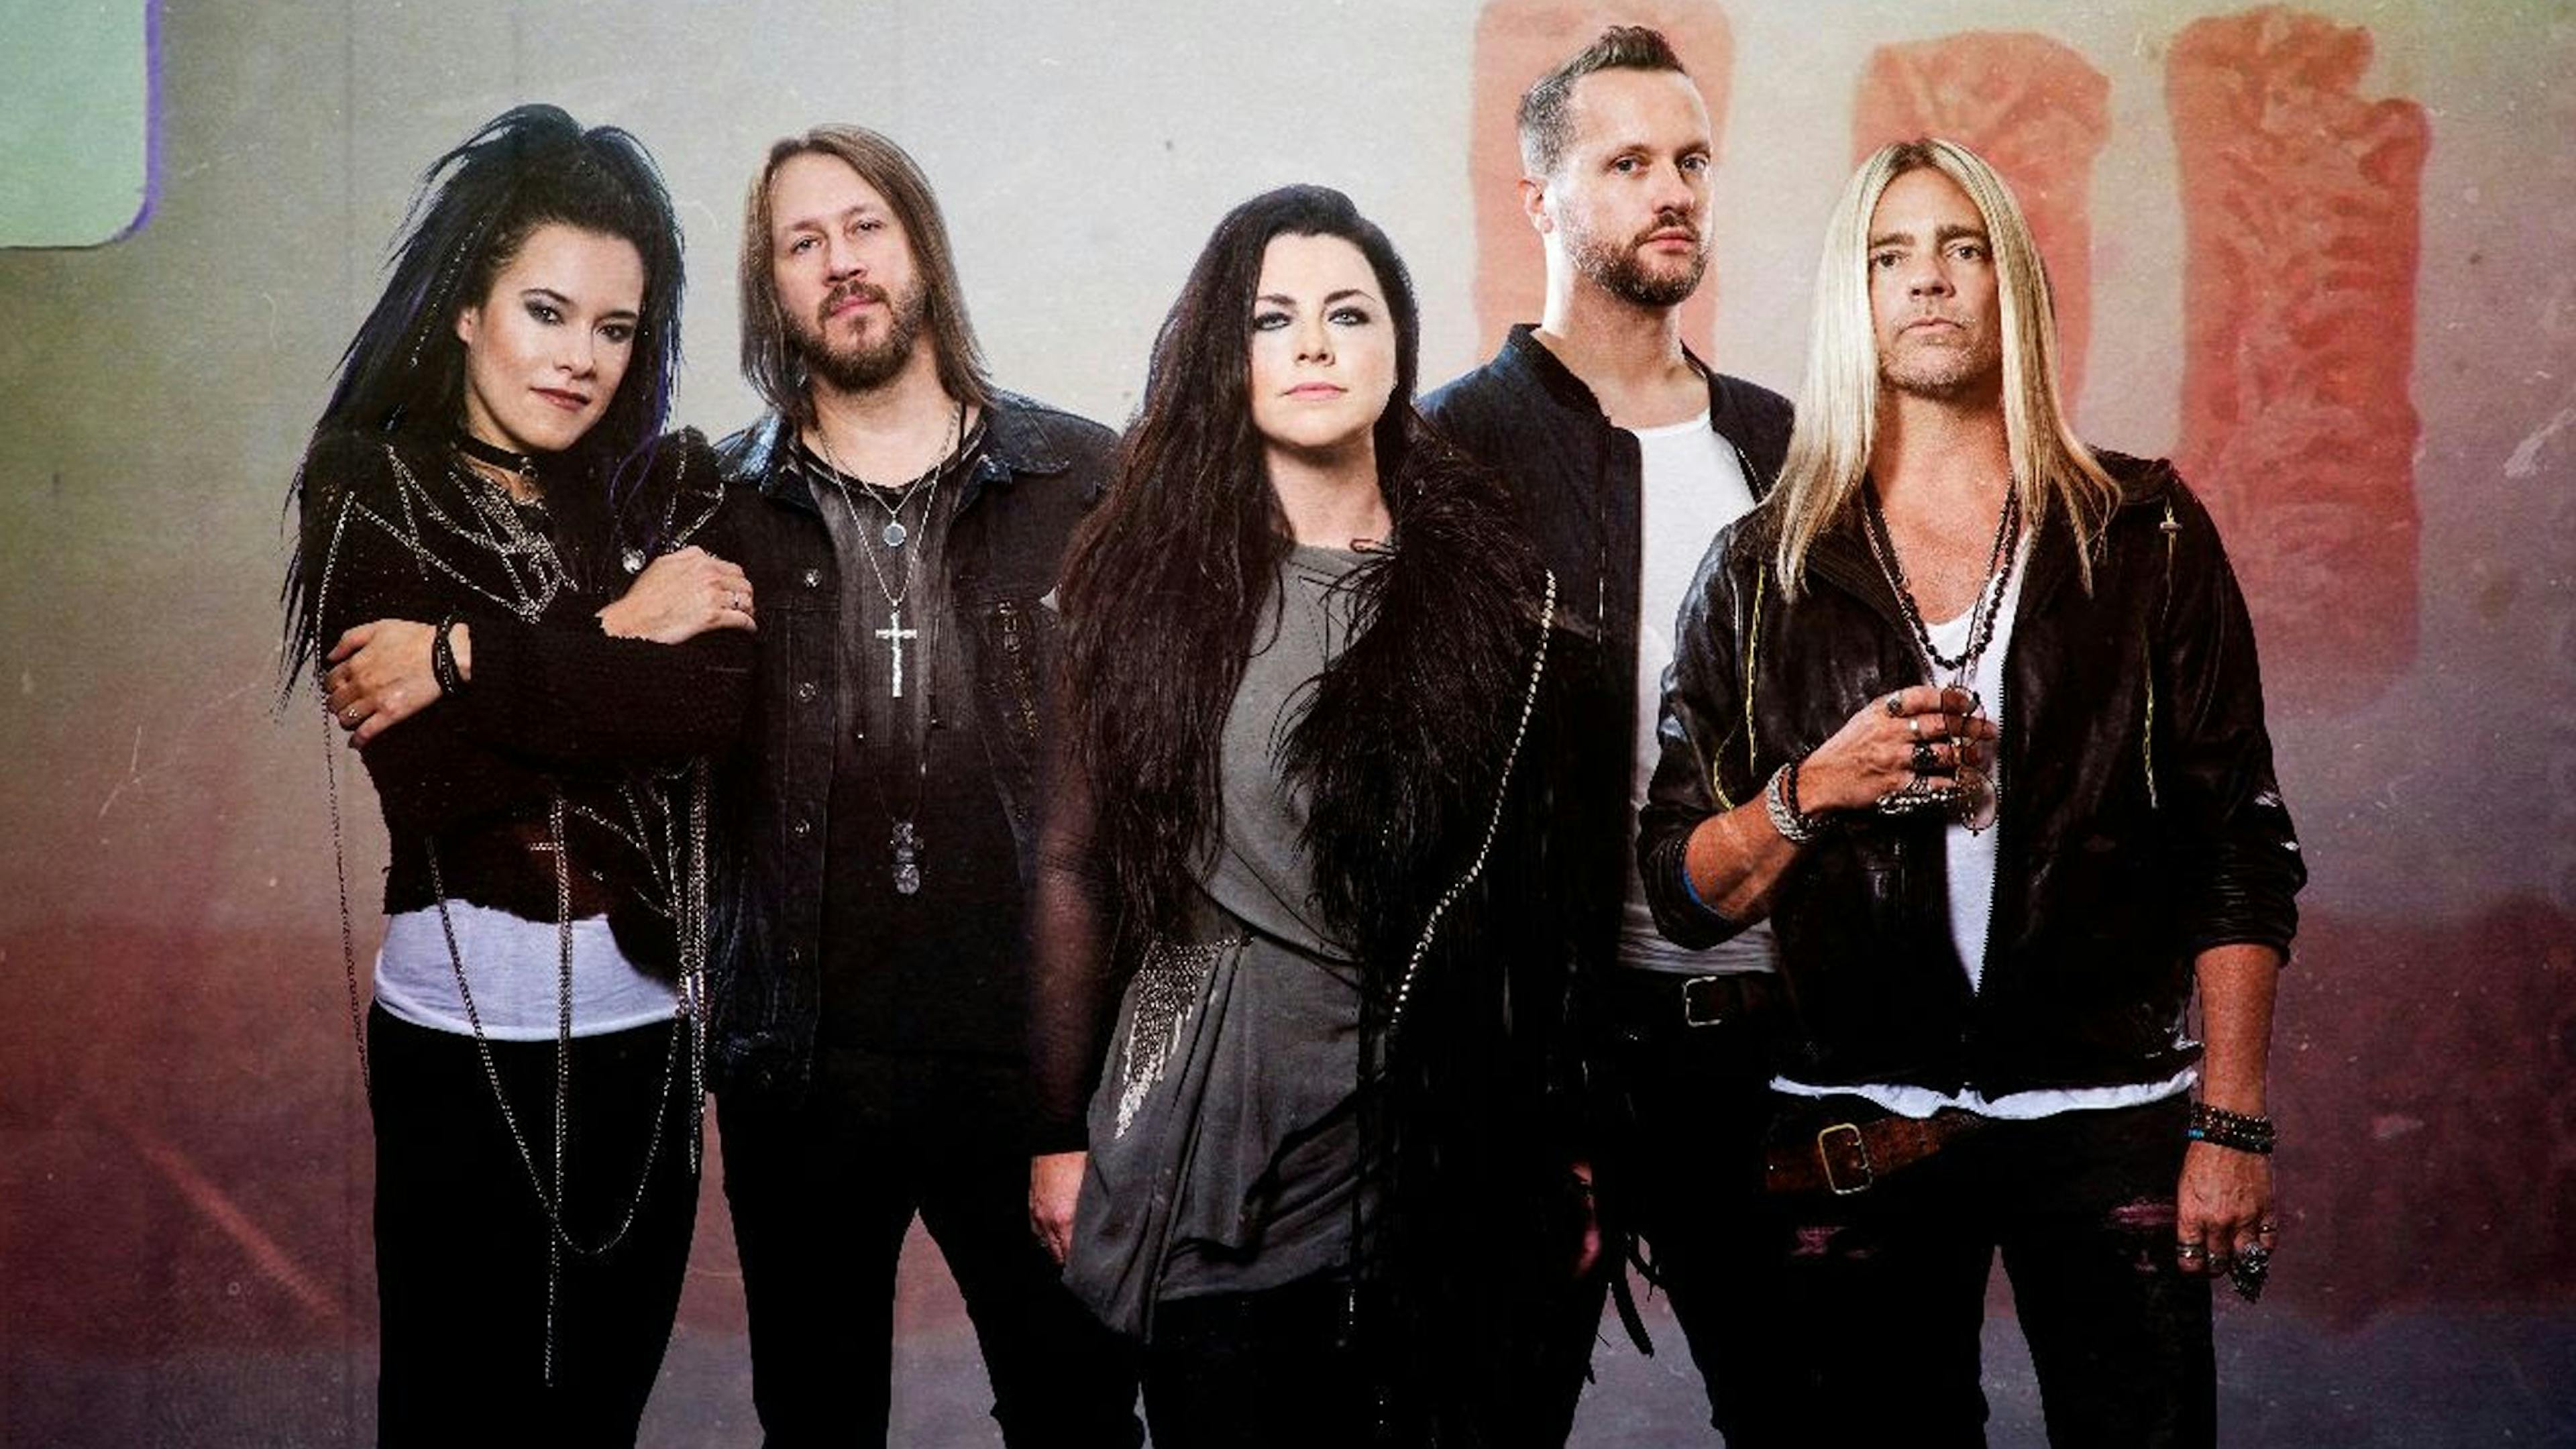 Amy Lee On Why Evanescence Are Releasing Their New Album "One Song At A Time"